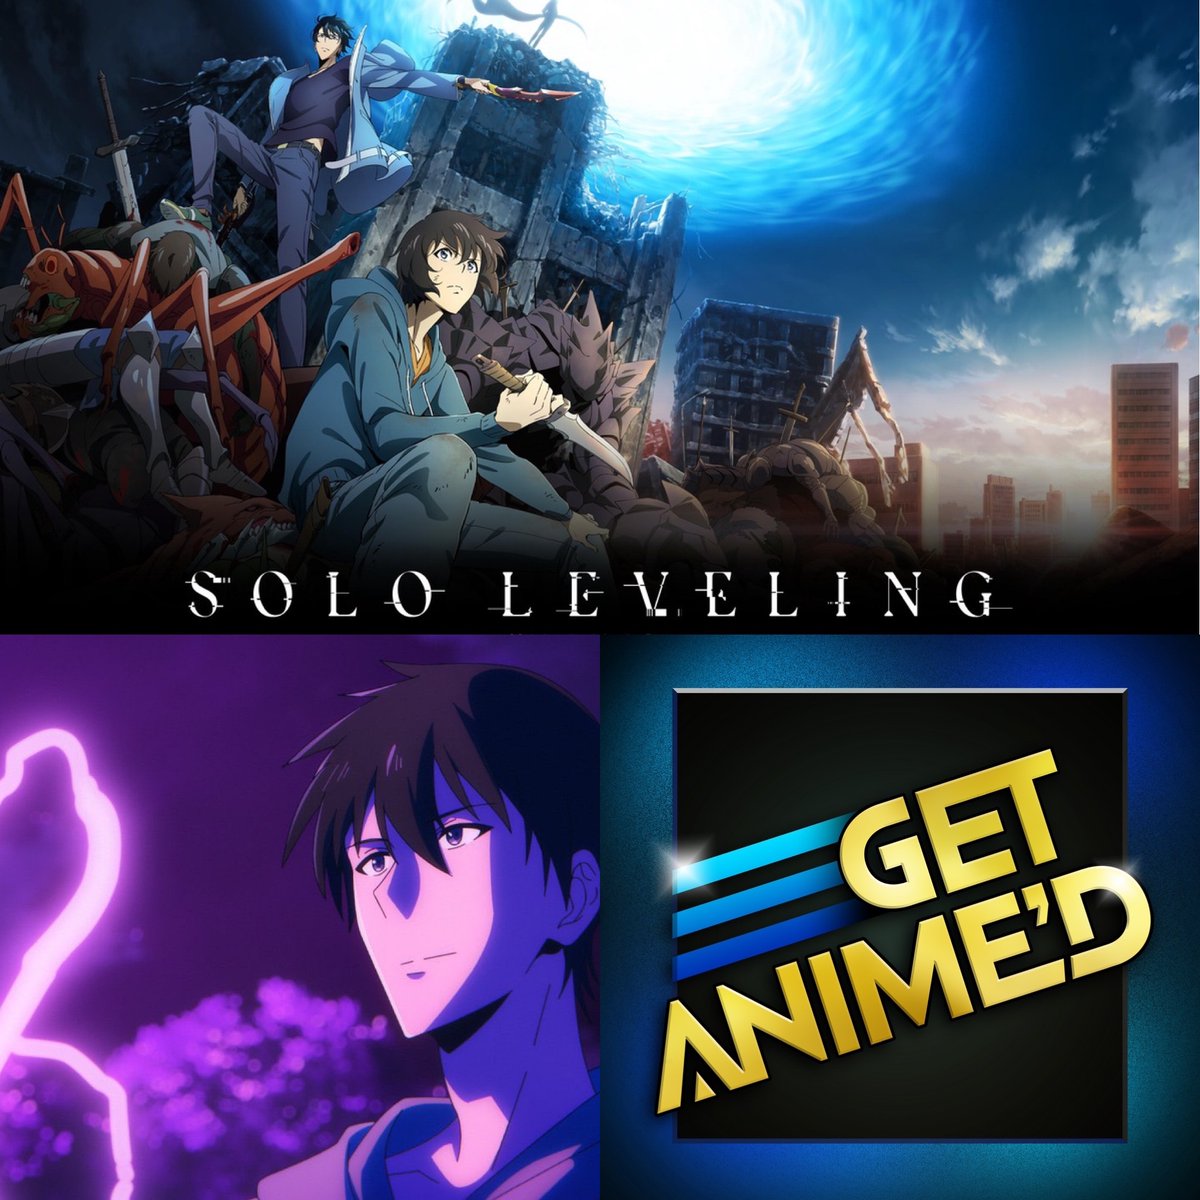 This week on Get Anime'd Matt, Heather and Nick discuss the final 2 episodes of Solo Leveling season 1, 'A Knight Who Defends an Empty Throne' & 'Arise'. Only on patreon.com/getplayed